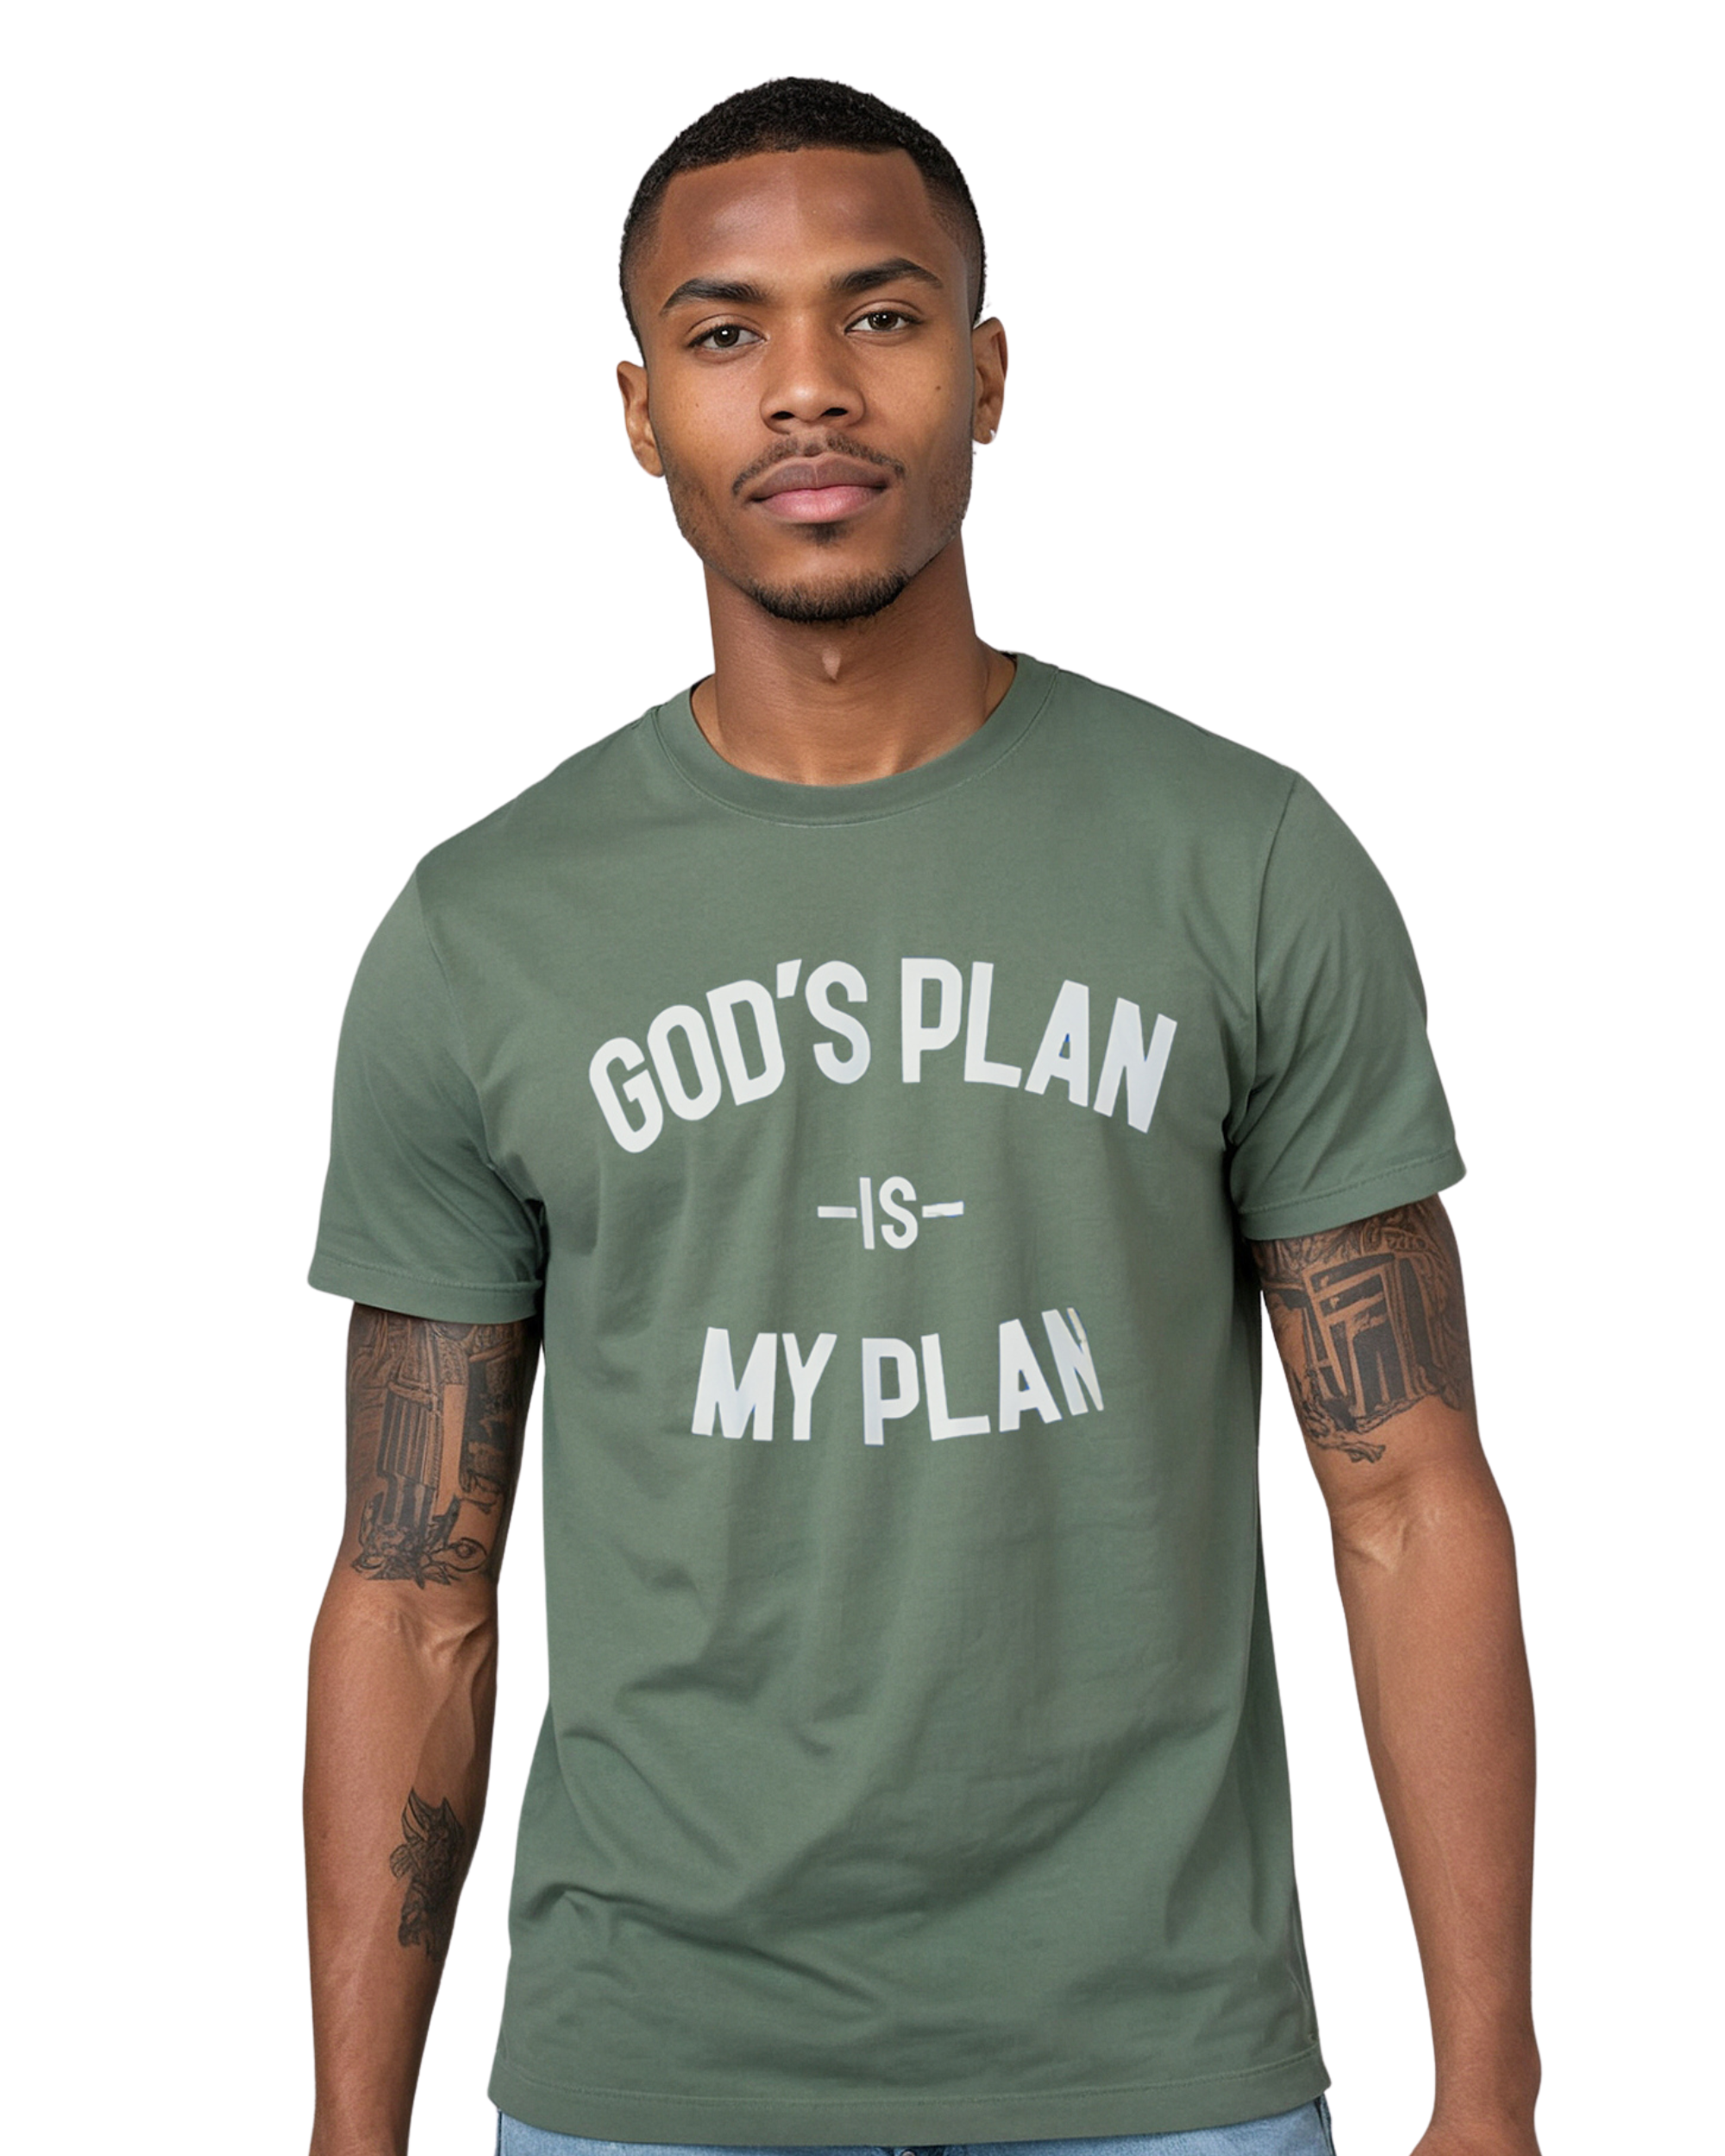 God's Plan My Plan, God's Plan, Used By God, Used By God Clothing, Christian Apparel, Christian T-Shirts, Christian Shirts, christian t shirts for women, Men's Christian T-Shirt, Christian Clothing, God Shirts, christian clothing t shirts, Christian Sweatshirts, womens christian t shirts, t-shirts about jesus, God Clothing, Jesus Hoodie, Jesus Clothes, God Is Dope, Art Of Homage, Red Letter Clothing, Elevated Faith, Beacon Threads, God The Father Apparel